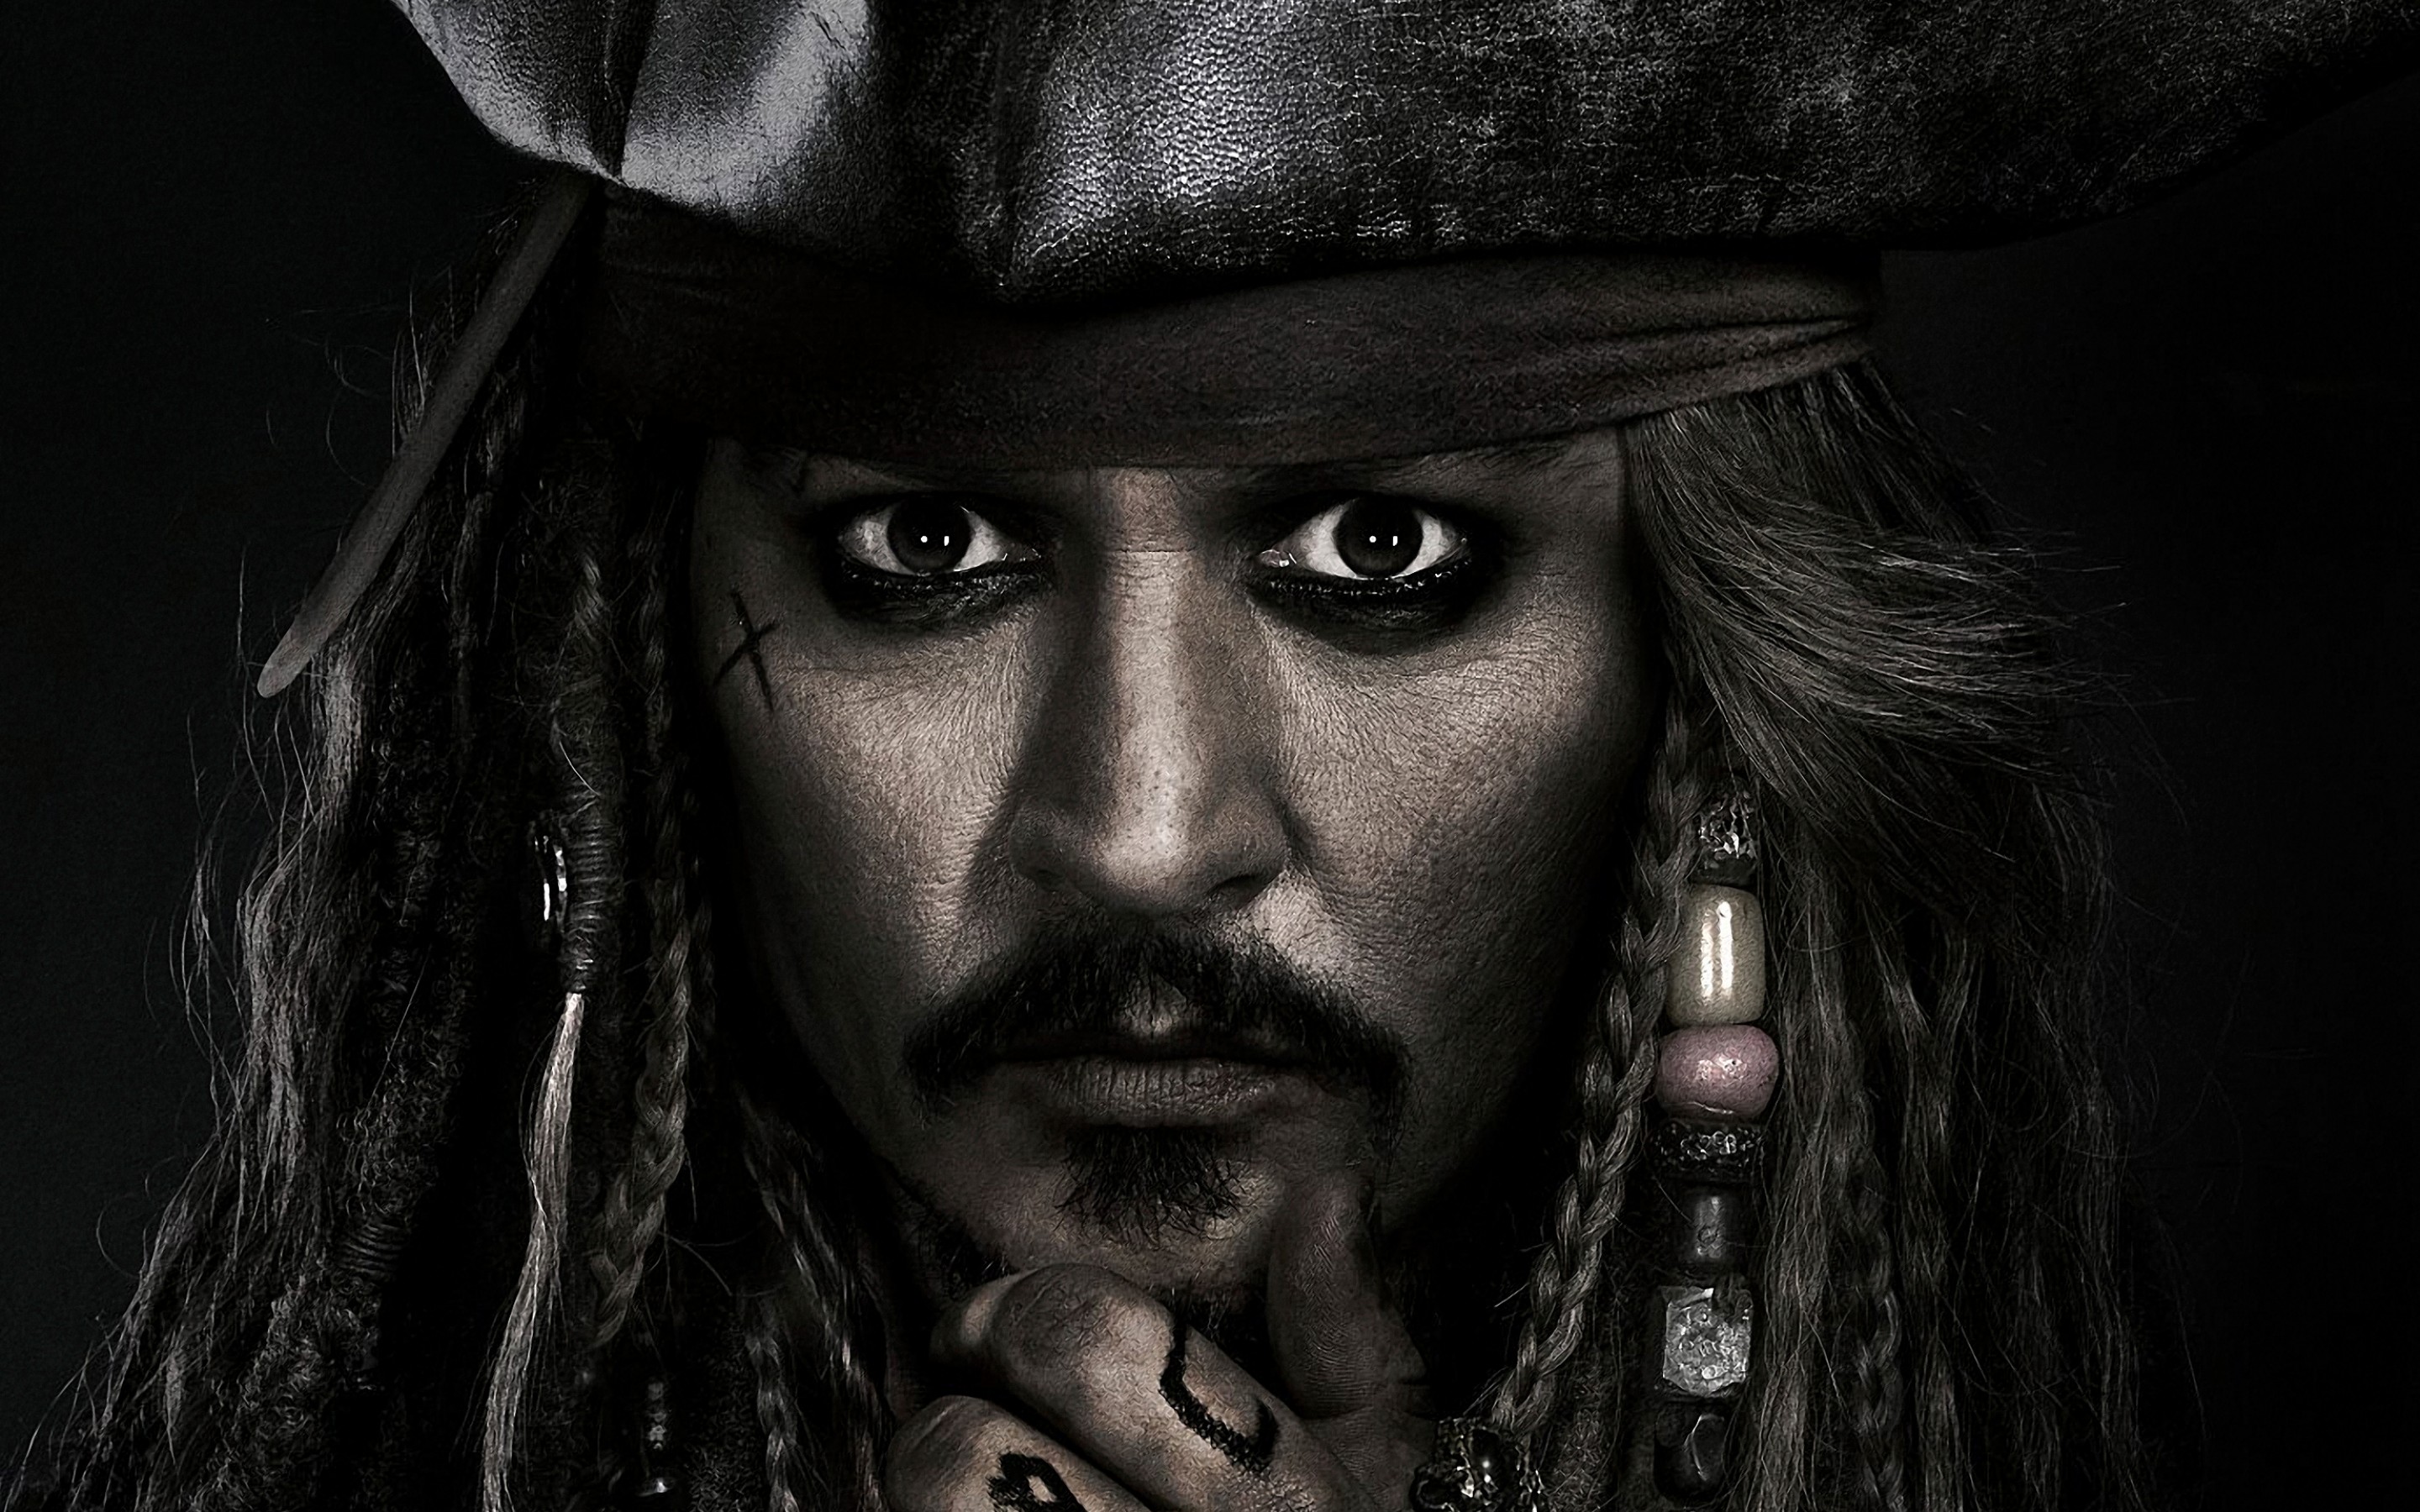 johnny depp, jack sparrow, movie, pirates of the caribbean: dead men tell no tales images